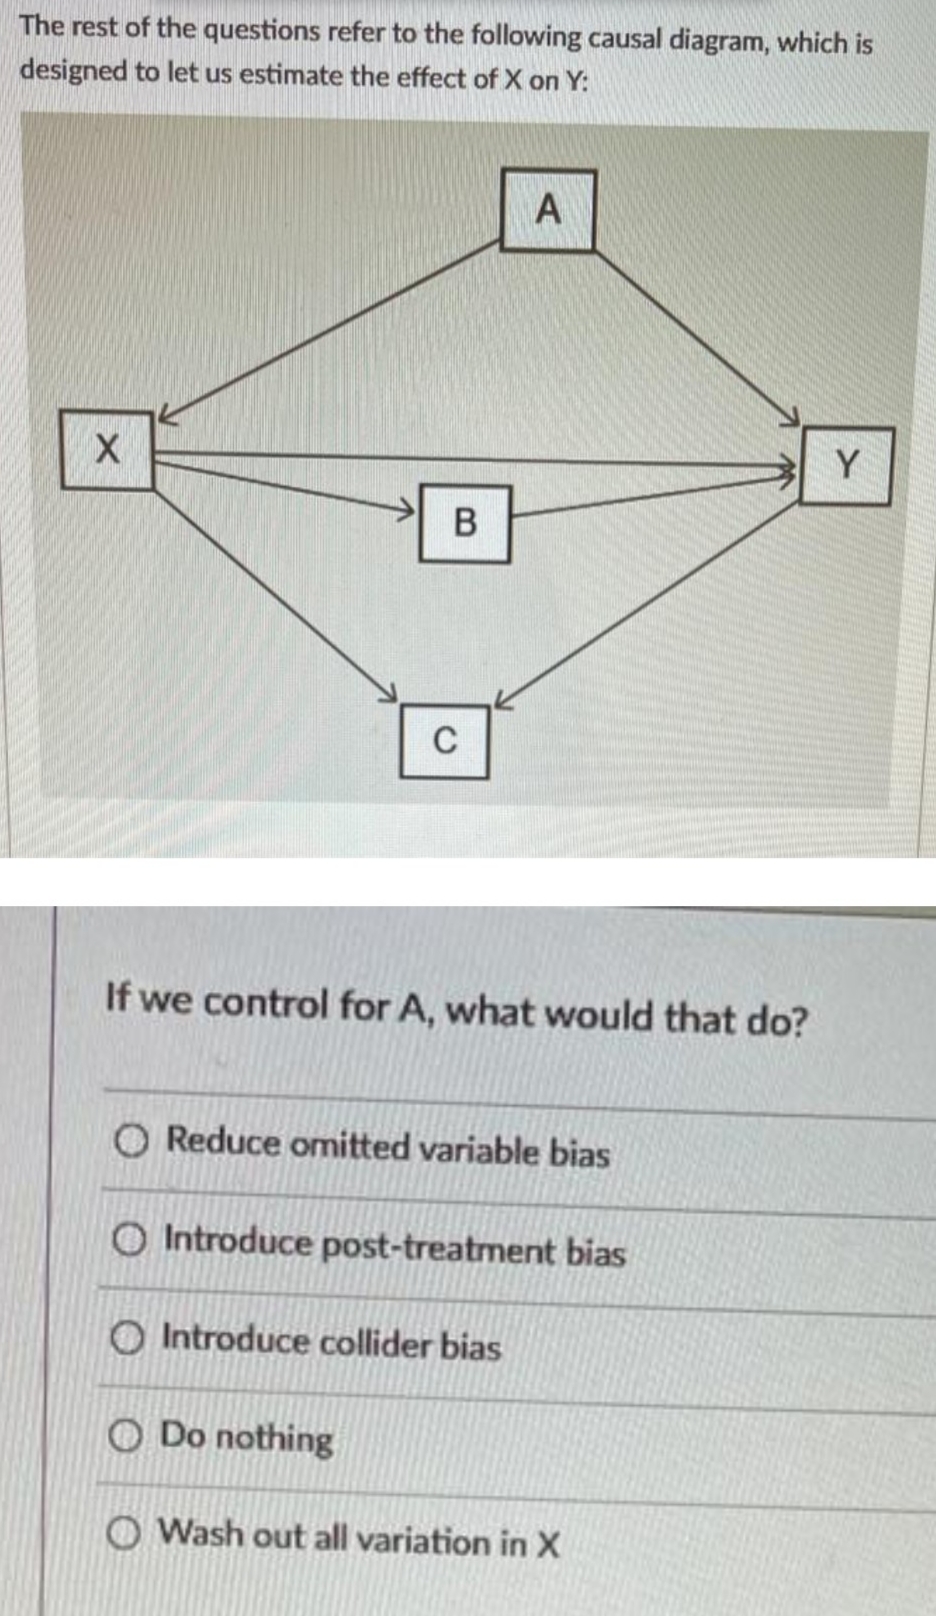 The rest of the questions refer to the following causal diagram, which is
designed to let us estimate the effect of X on Y:
A
X
C
If we control for A, what would that do?
O Reduce omitted variable bias
Introduce post-treatment bias
B
O Introduce collider bias
Do nothing
Wash out all variation in X